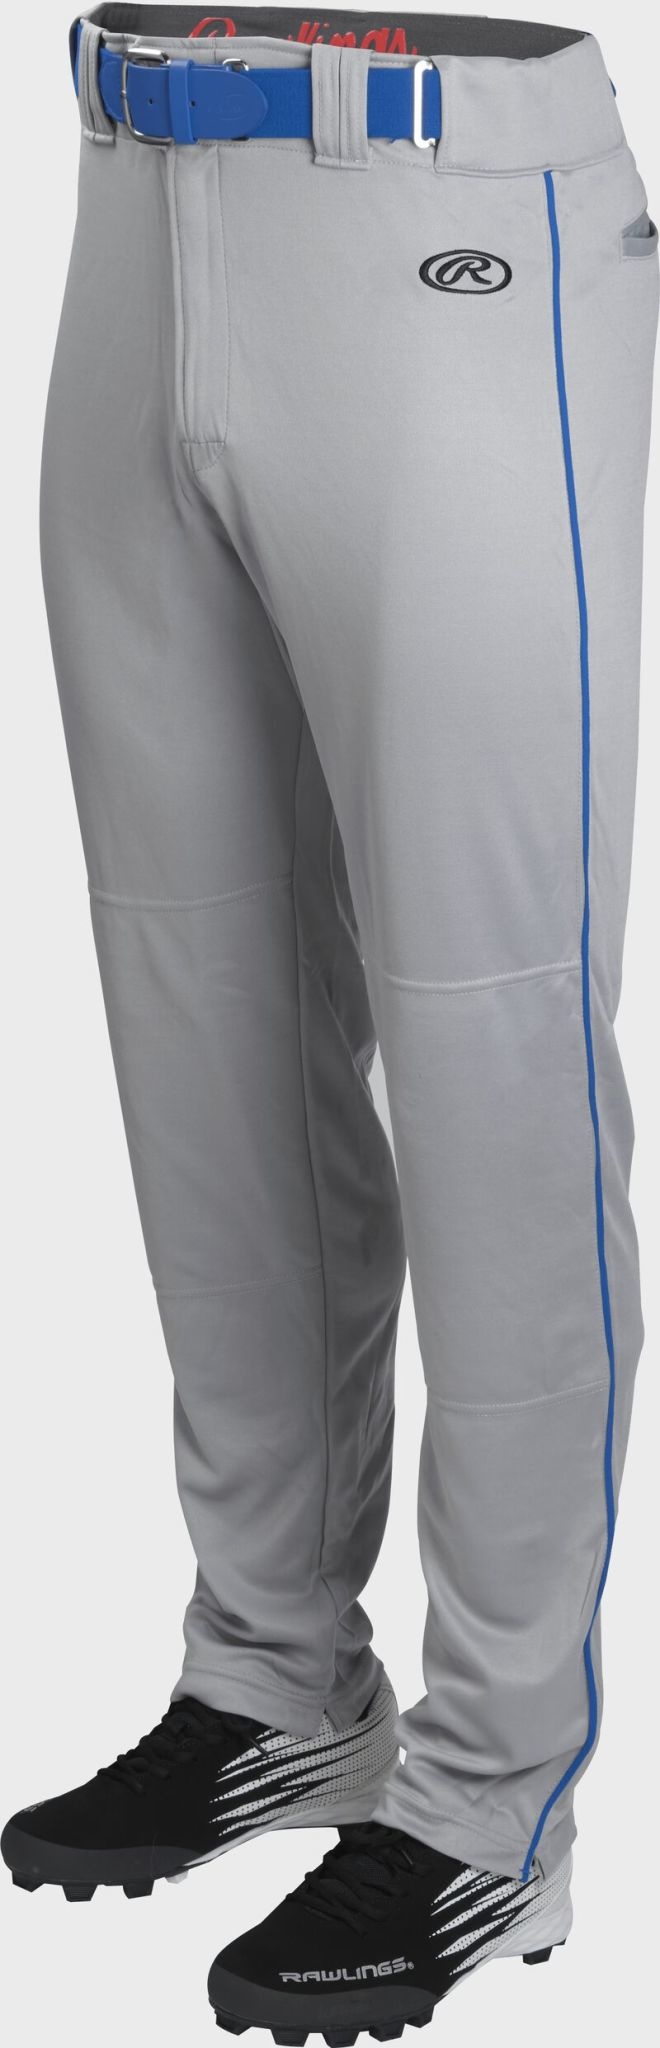 Rawlings Launch LNCHSRP semi-relaxed piped long baseball pant adult